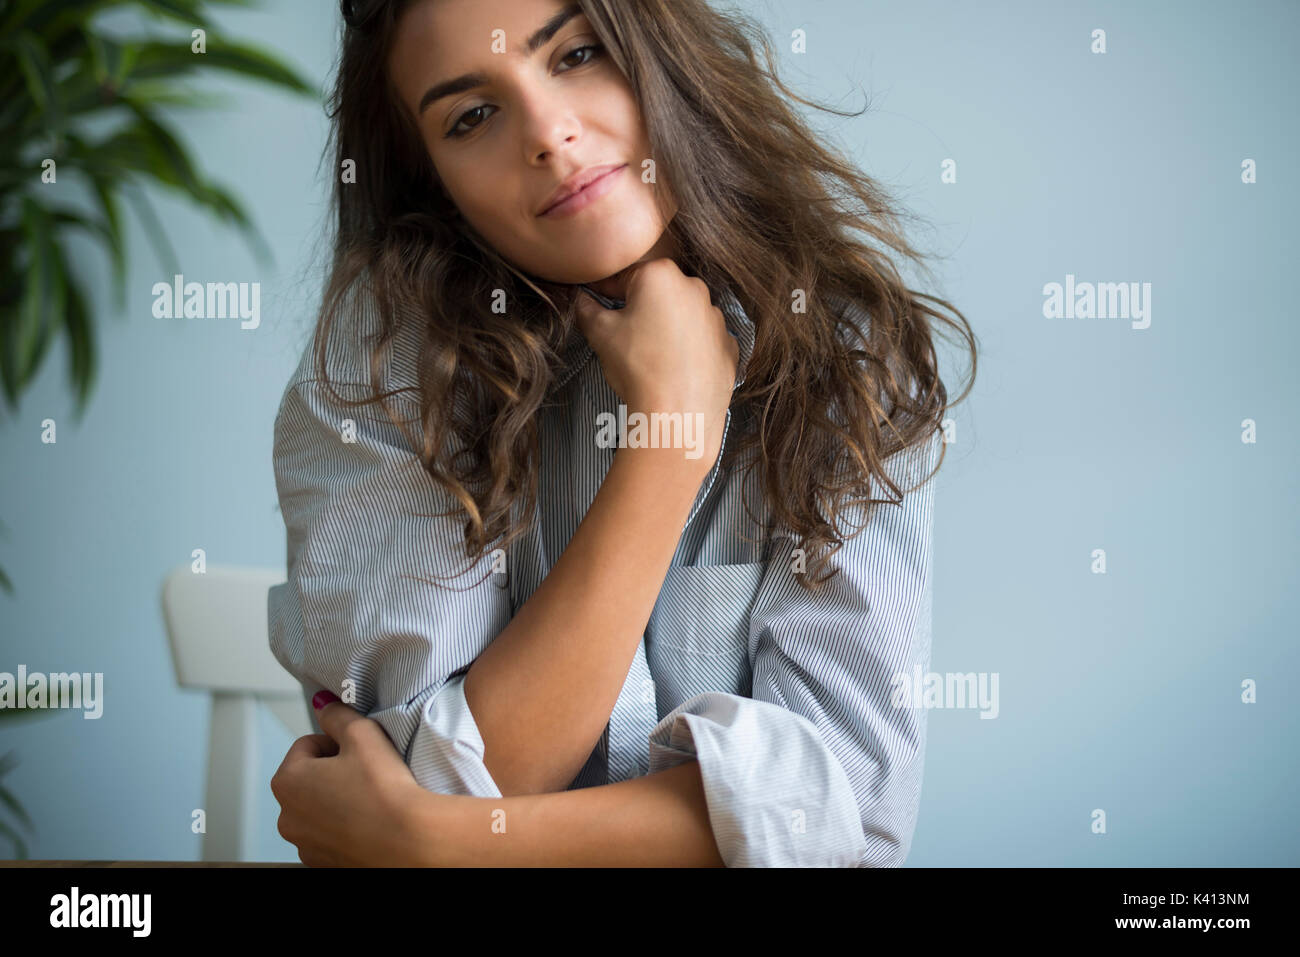 Portrait of a very attractive young woman Stock Photo - Alamy